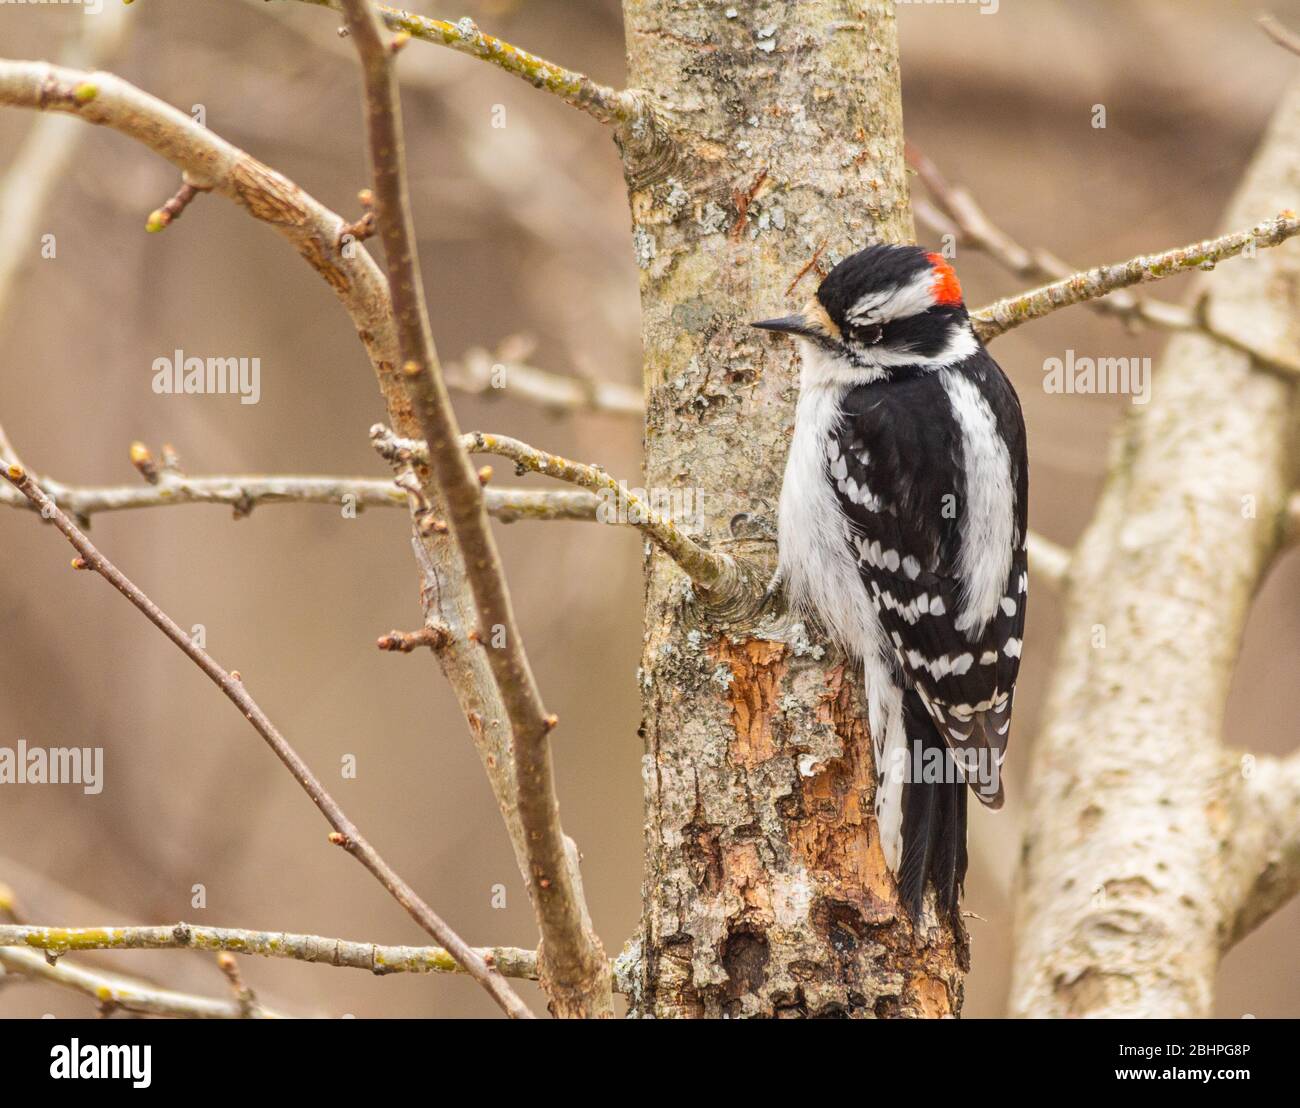 Downy woodpecker perched on trunk of tree. Stock Photo